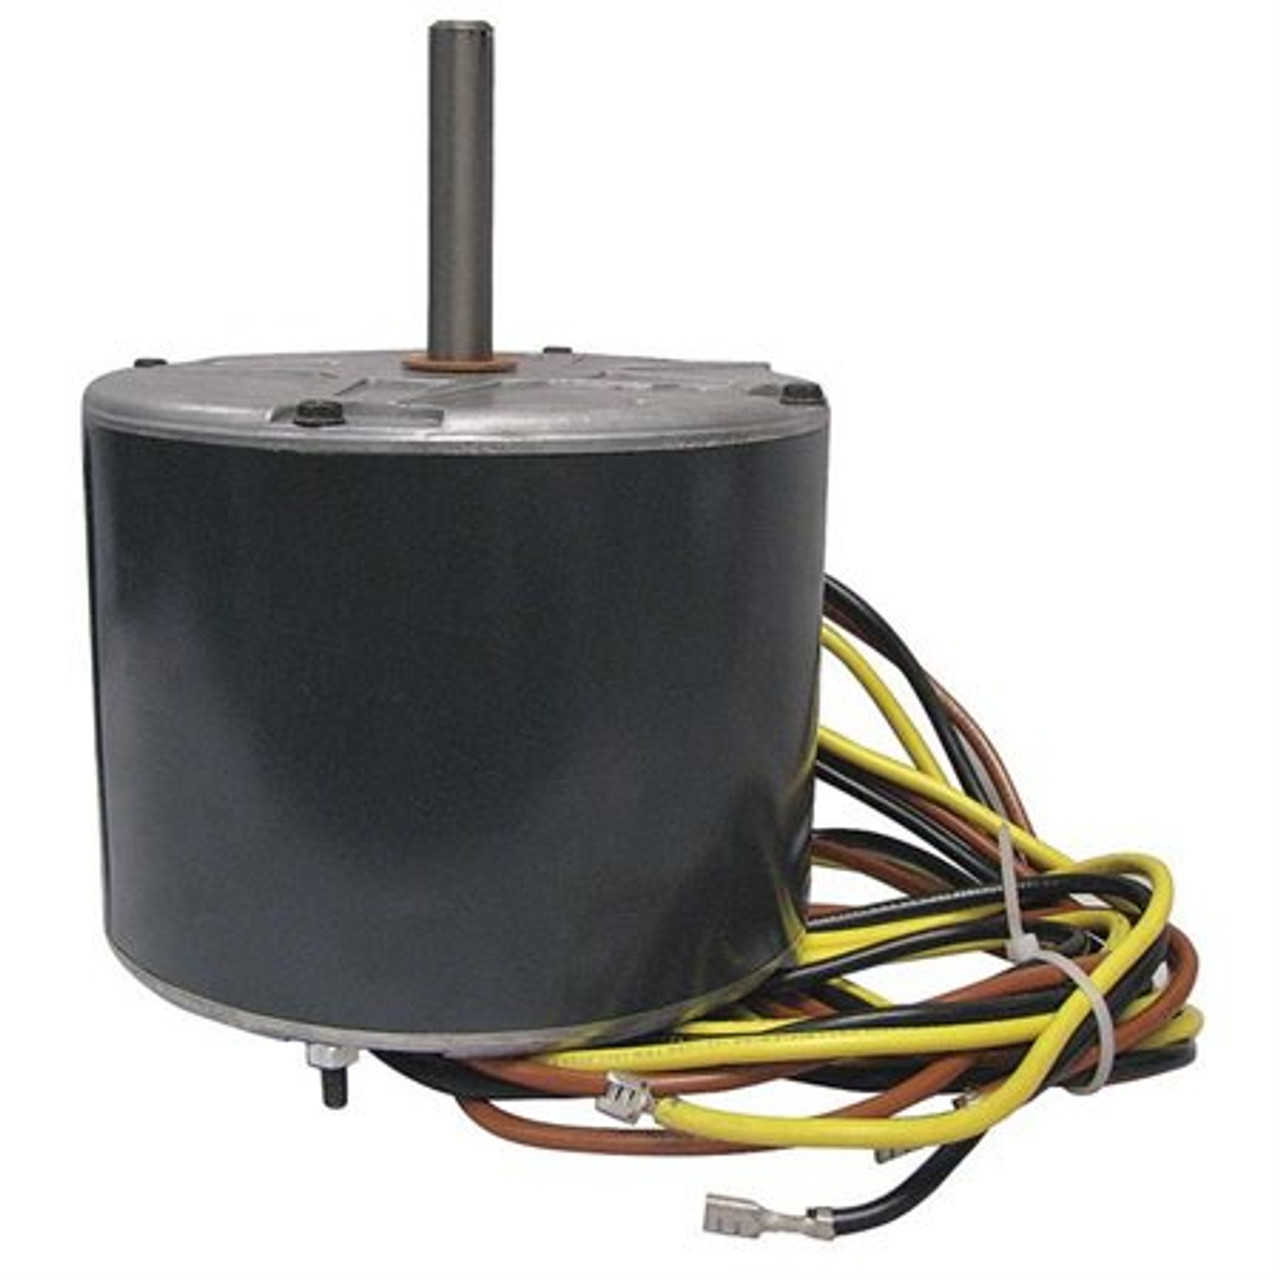 3S046 Carrier Replacement 1/10 HP 1100 RPM 208-230V 5-5/8" Dia PSC Condensor Motor